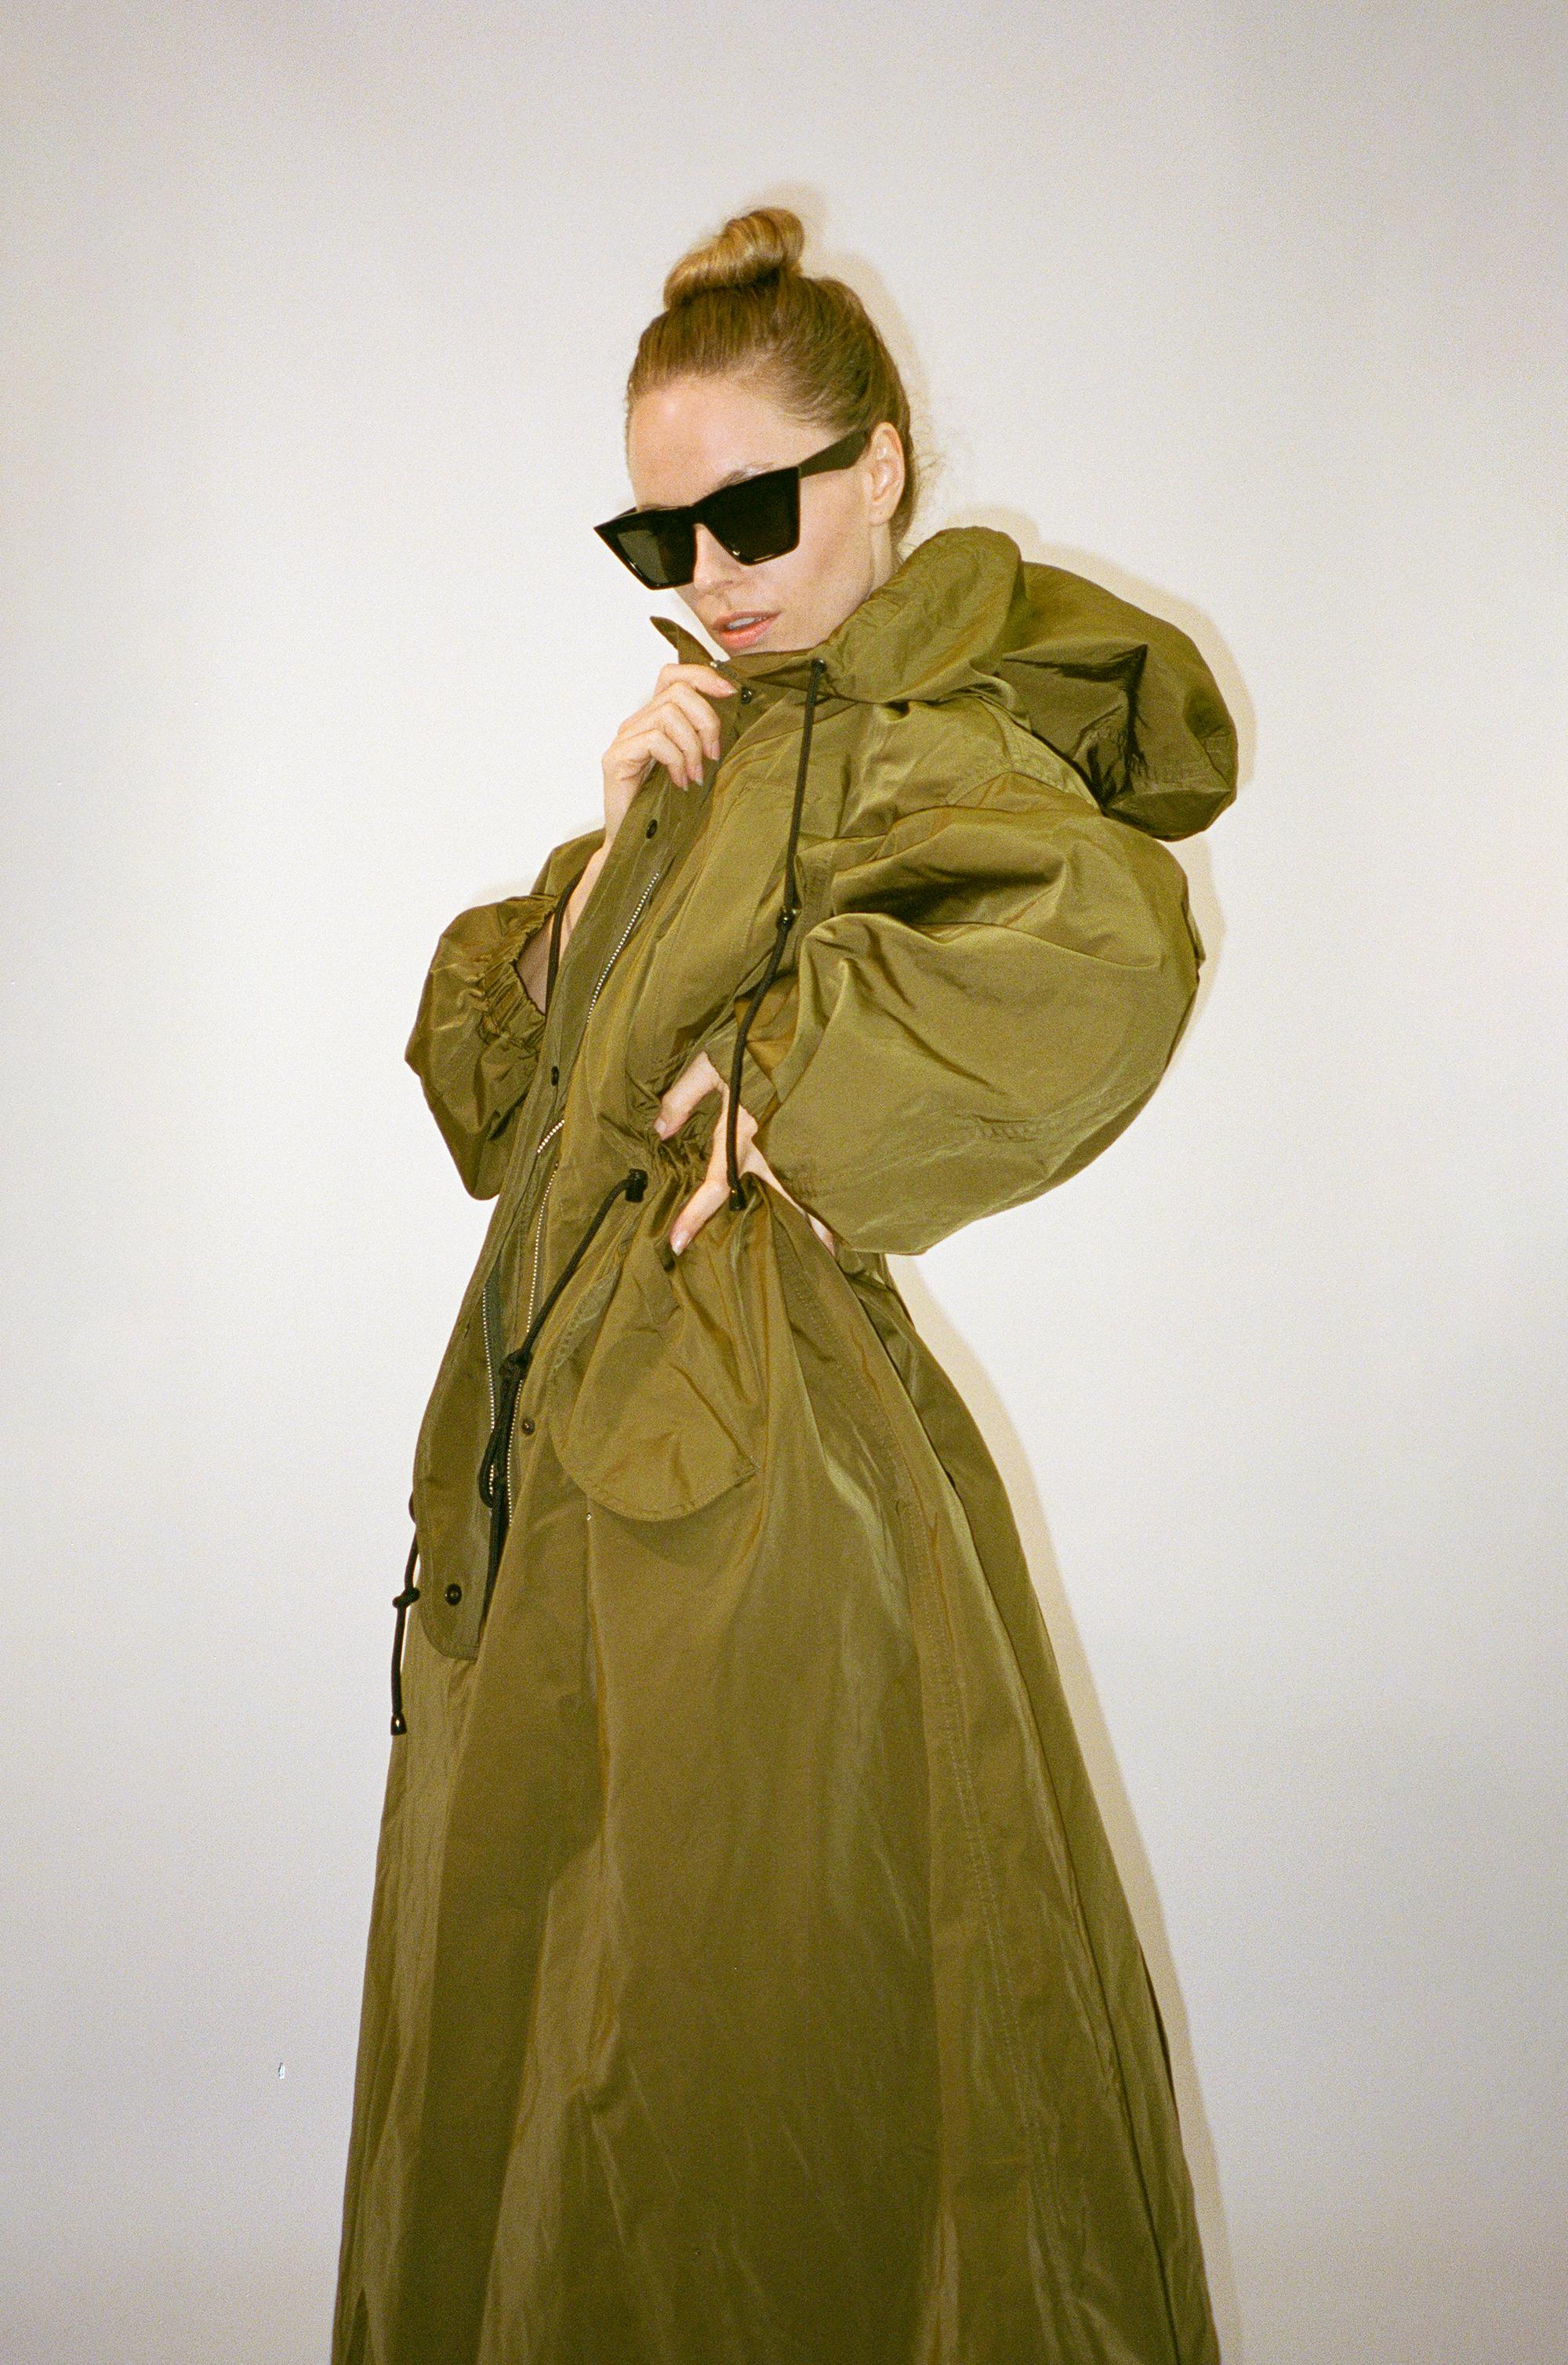 Incredible oversized khaki parka by Dries Van Noten <3

This chic ankle-length parka works for all genders. It is made from nylon and has such an amazing silhouette - It features an oversized fit, large hood, raglan sleeves, drawstrings at the